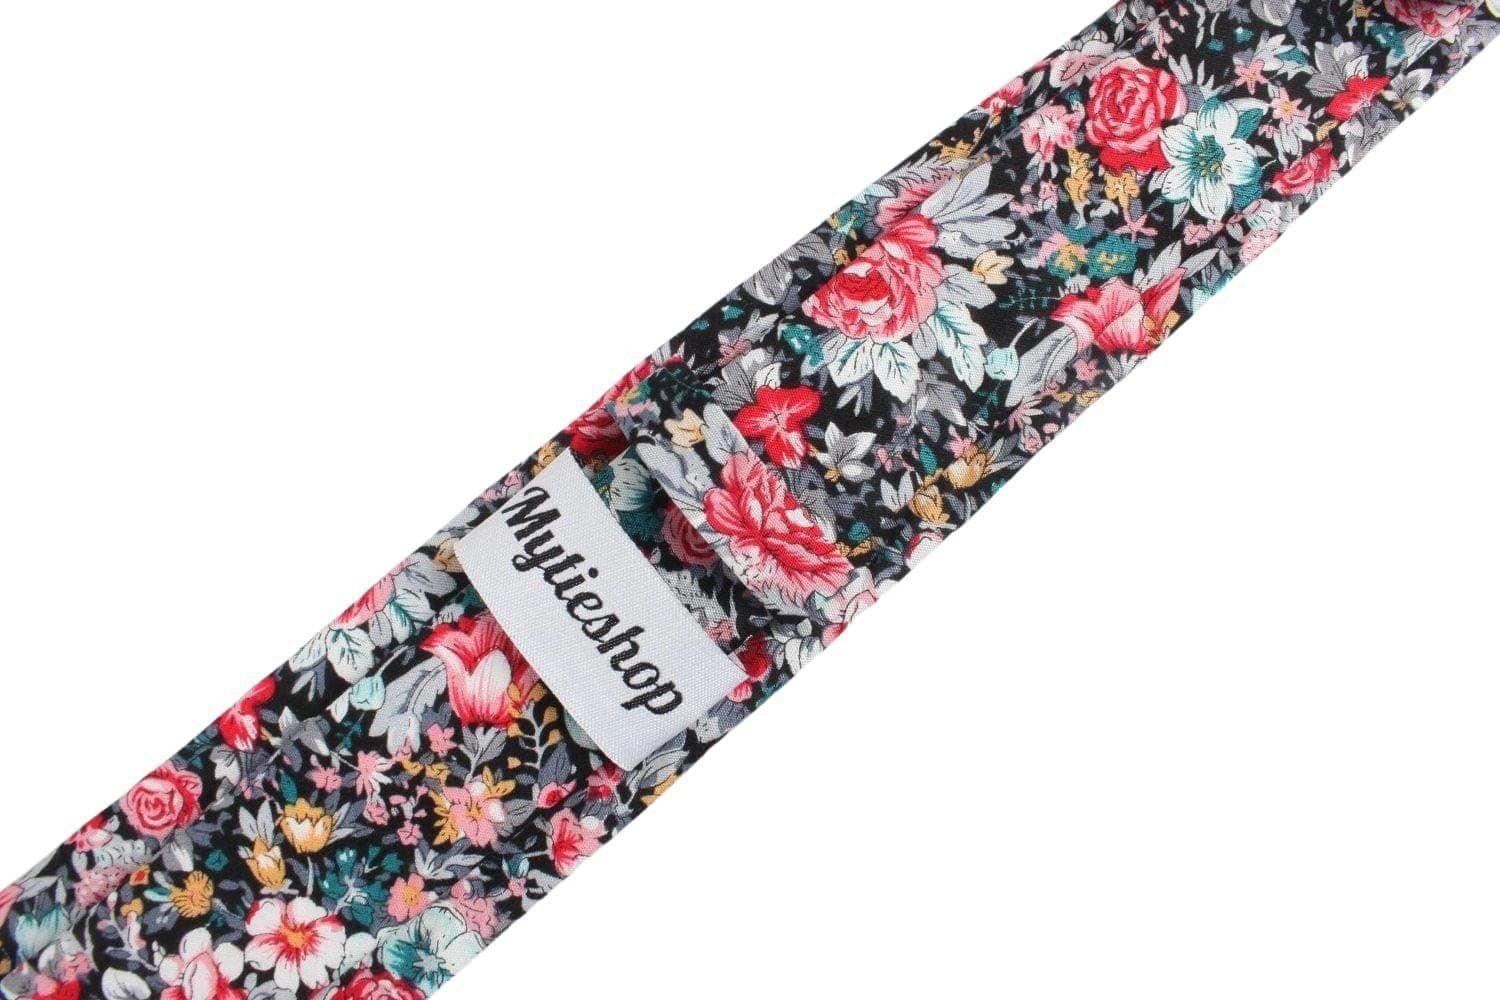 ISAAC Floral Skinny Tie 2.36"-Neckties-ISAAC Floral Skinny Tie Men’s Floral Necktie for weddings and events, great for prom and anniversary gifts. Mens floral ties near me-Mytieshop. Skinny ties for weddings anniversaries. Father of bride. Groomsmen. Cool skinny neckties for men. Neckwear for prom, missions and fancy events. Gift ideas for men. Anniversaries ideas. Wedding aesthetics. Flower ties. Dry flower ties.